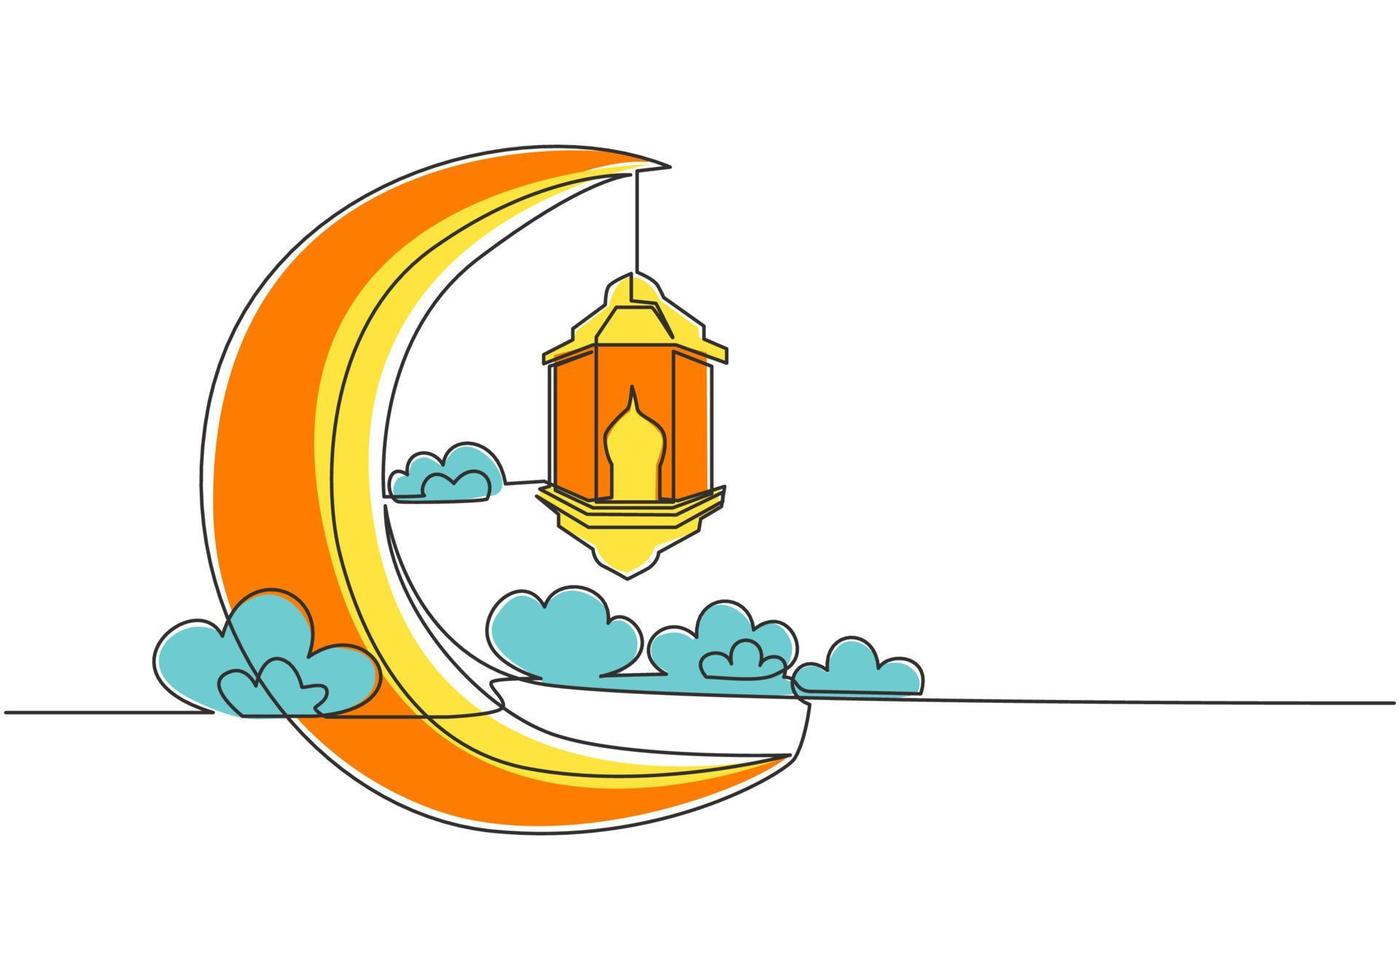 Ramadan Kareem greeting card, poster and banner design background. One continuous line drawing of Islamic ornament lantern lamp hanging on moon at cloudy sky. Single line draw vector illustration